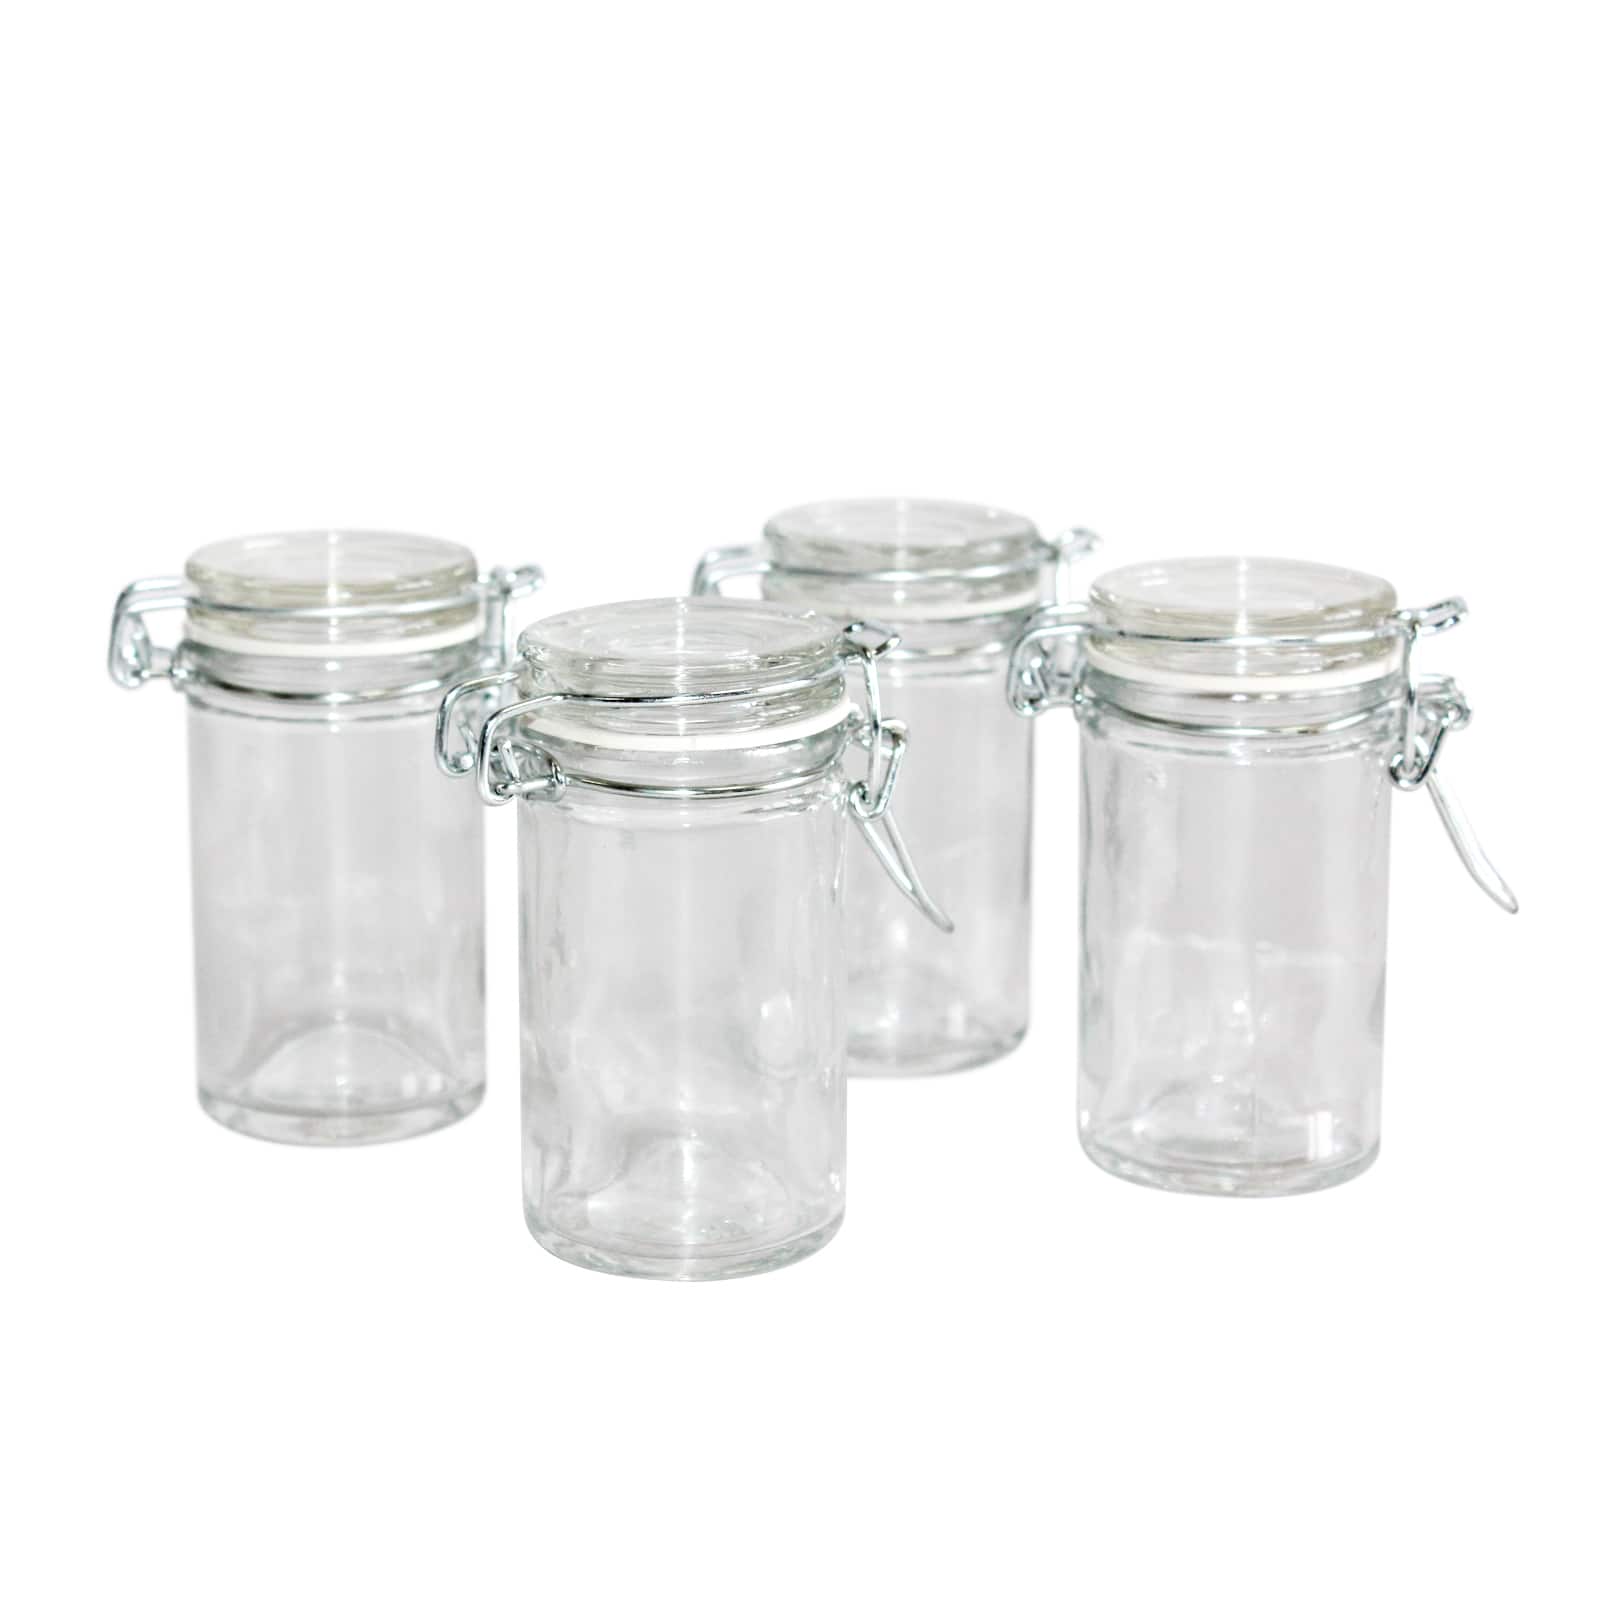 3 Pack Glass Apothecary Jar, Candy Jars With Lids, Clear Glass Jars for  Display Storage, Display Decor, Home Decor 9/9/8 